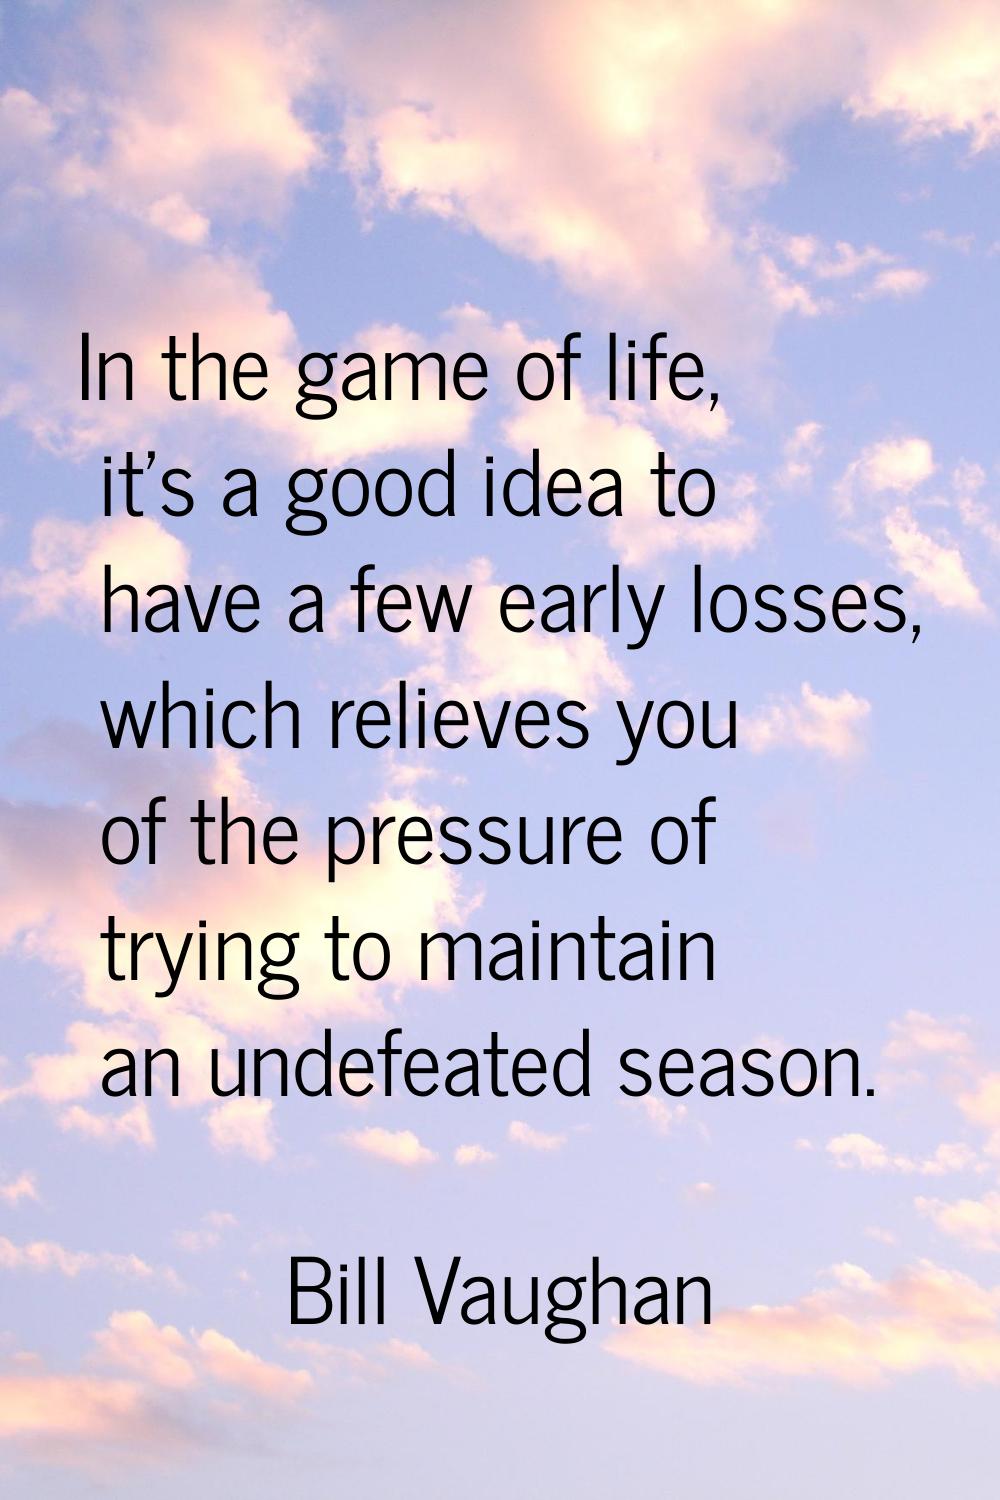 In the game of life, it's a good idea to have a few early losses, which relieves you of the pressur